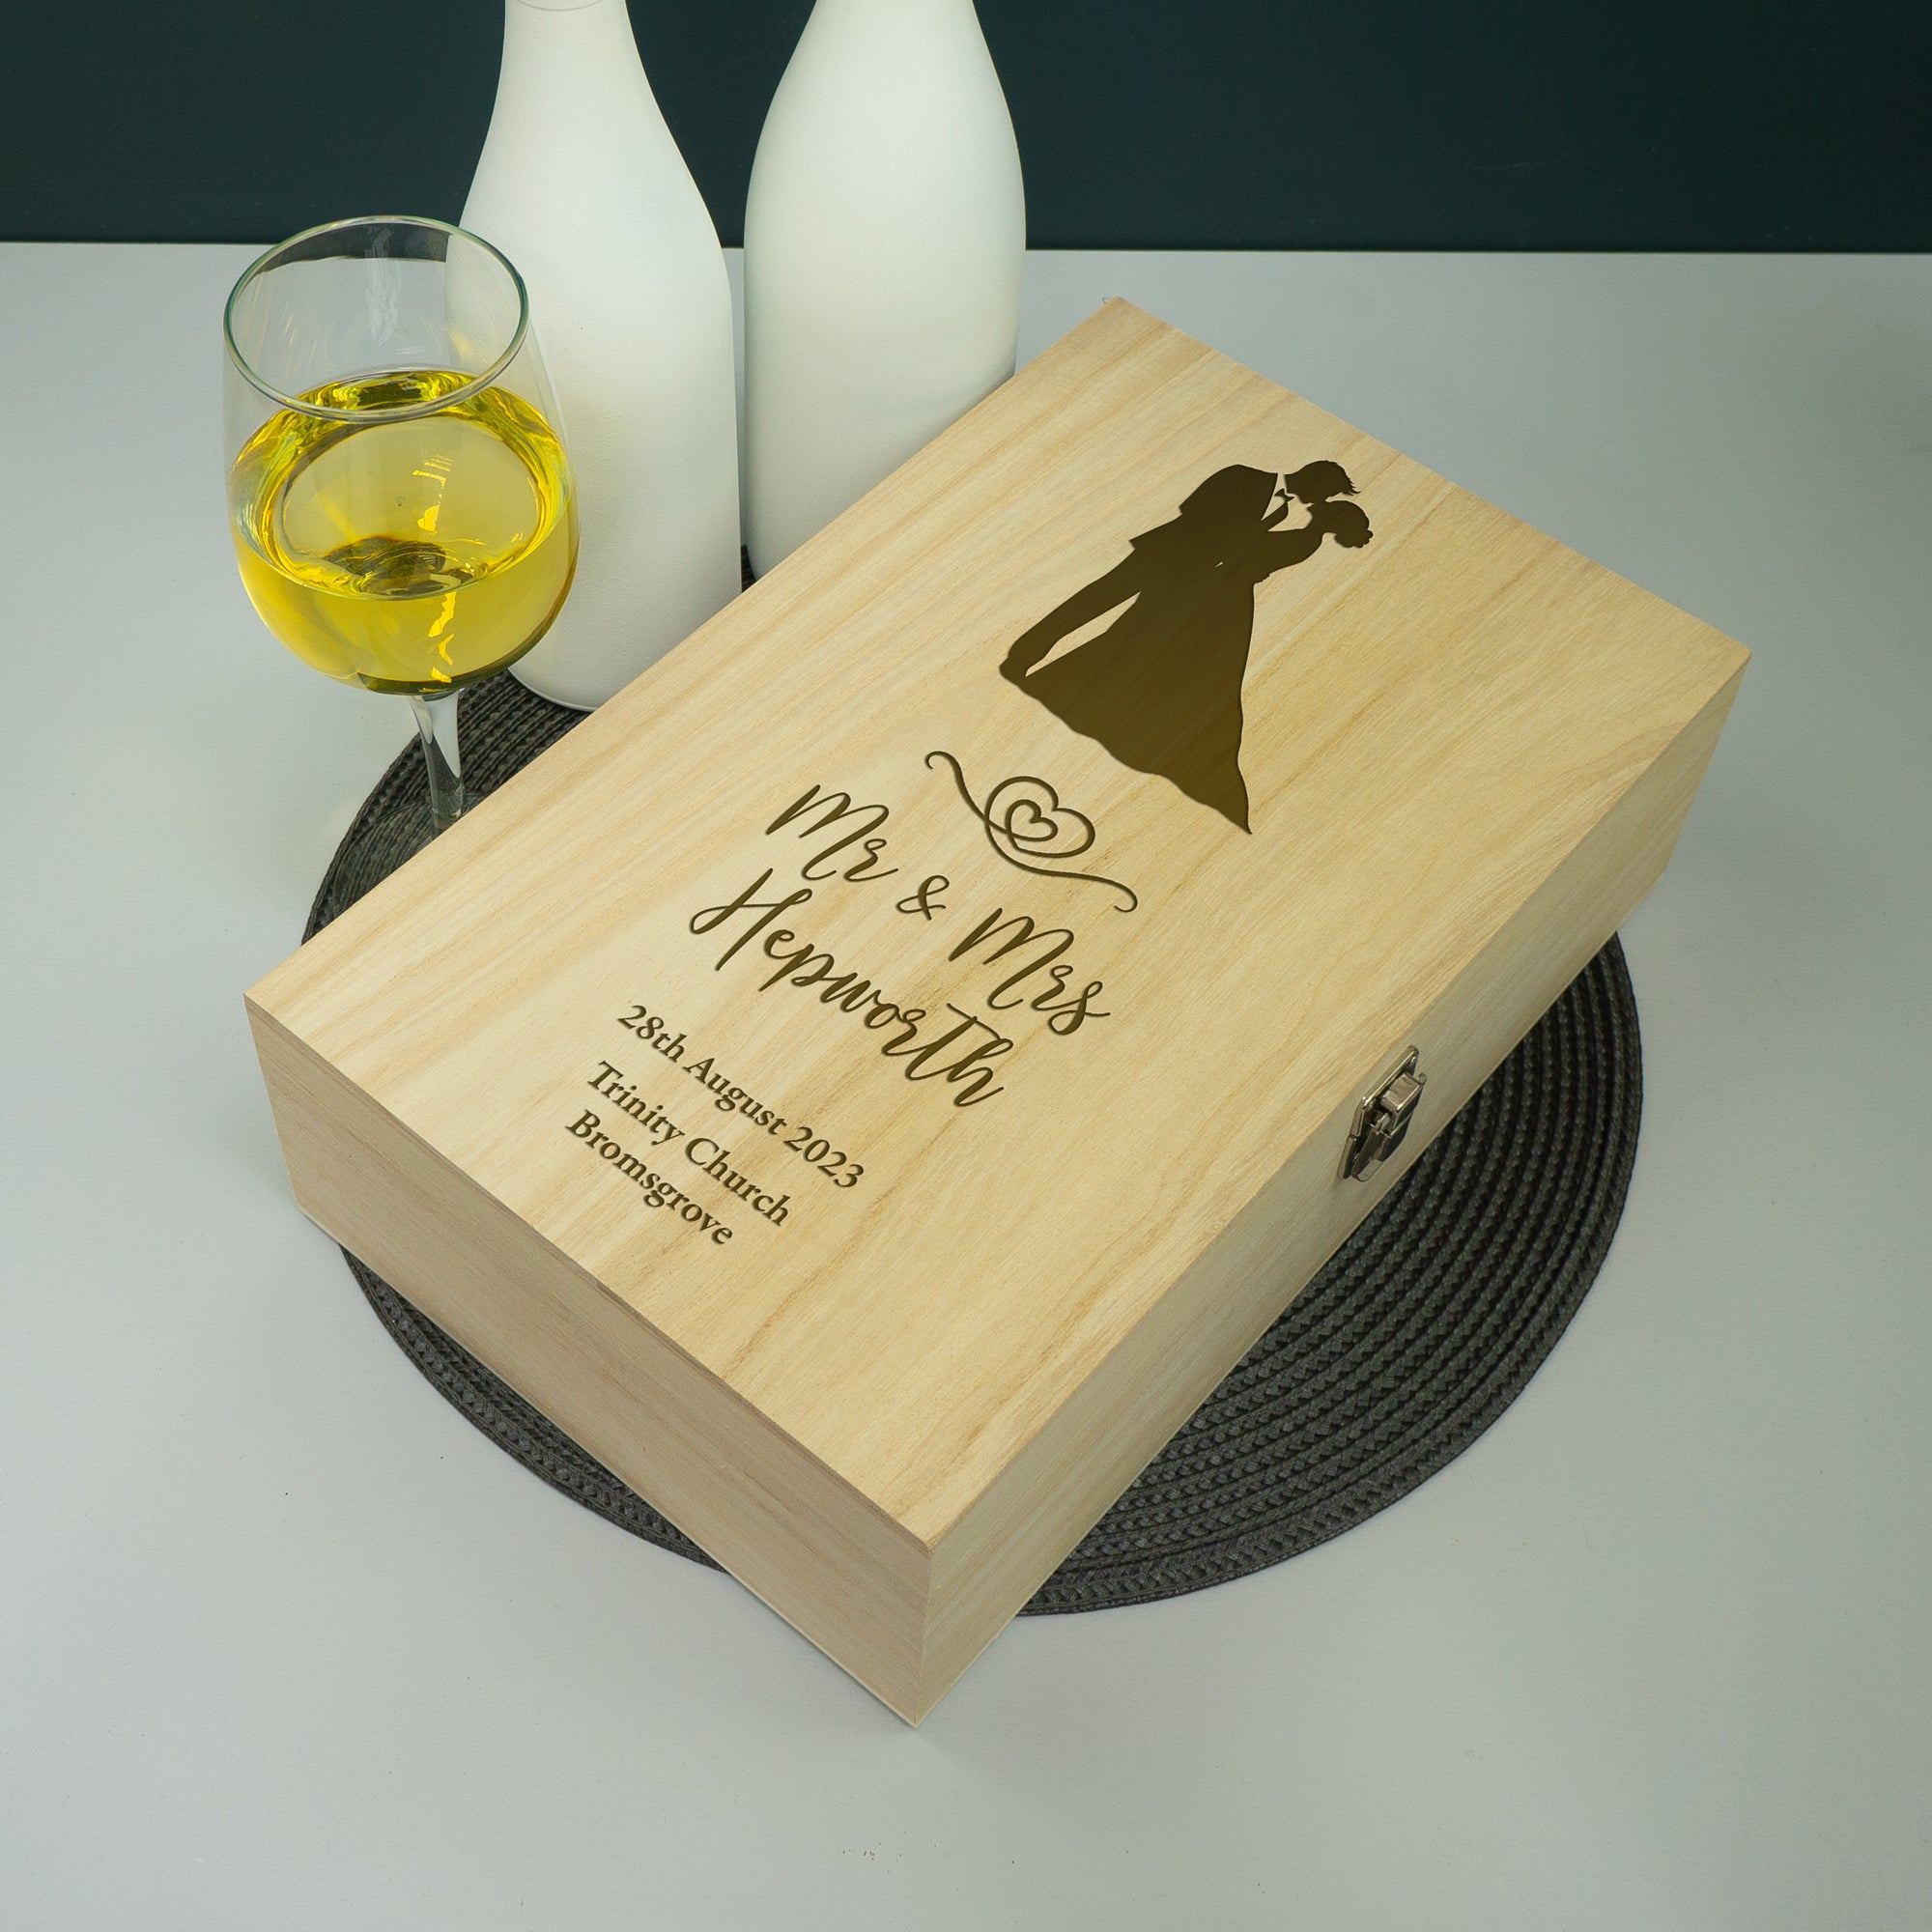 Personalised Mr and Mrs wedding twin wine bottle gifting box